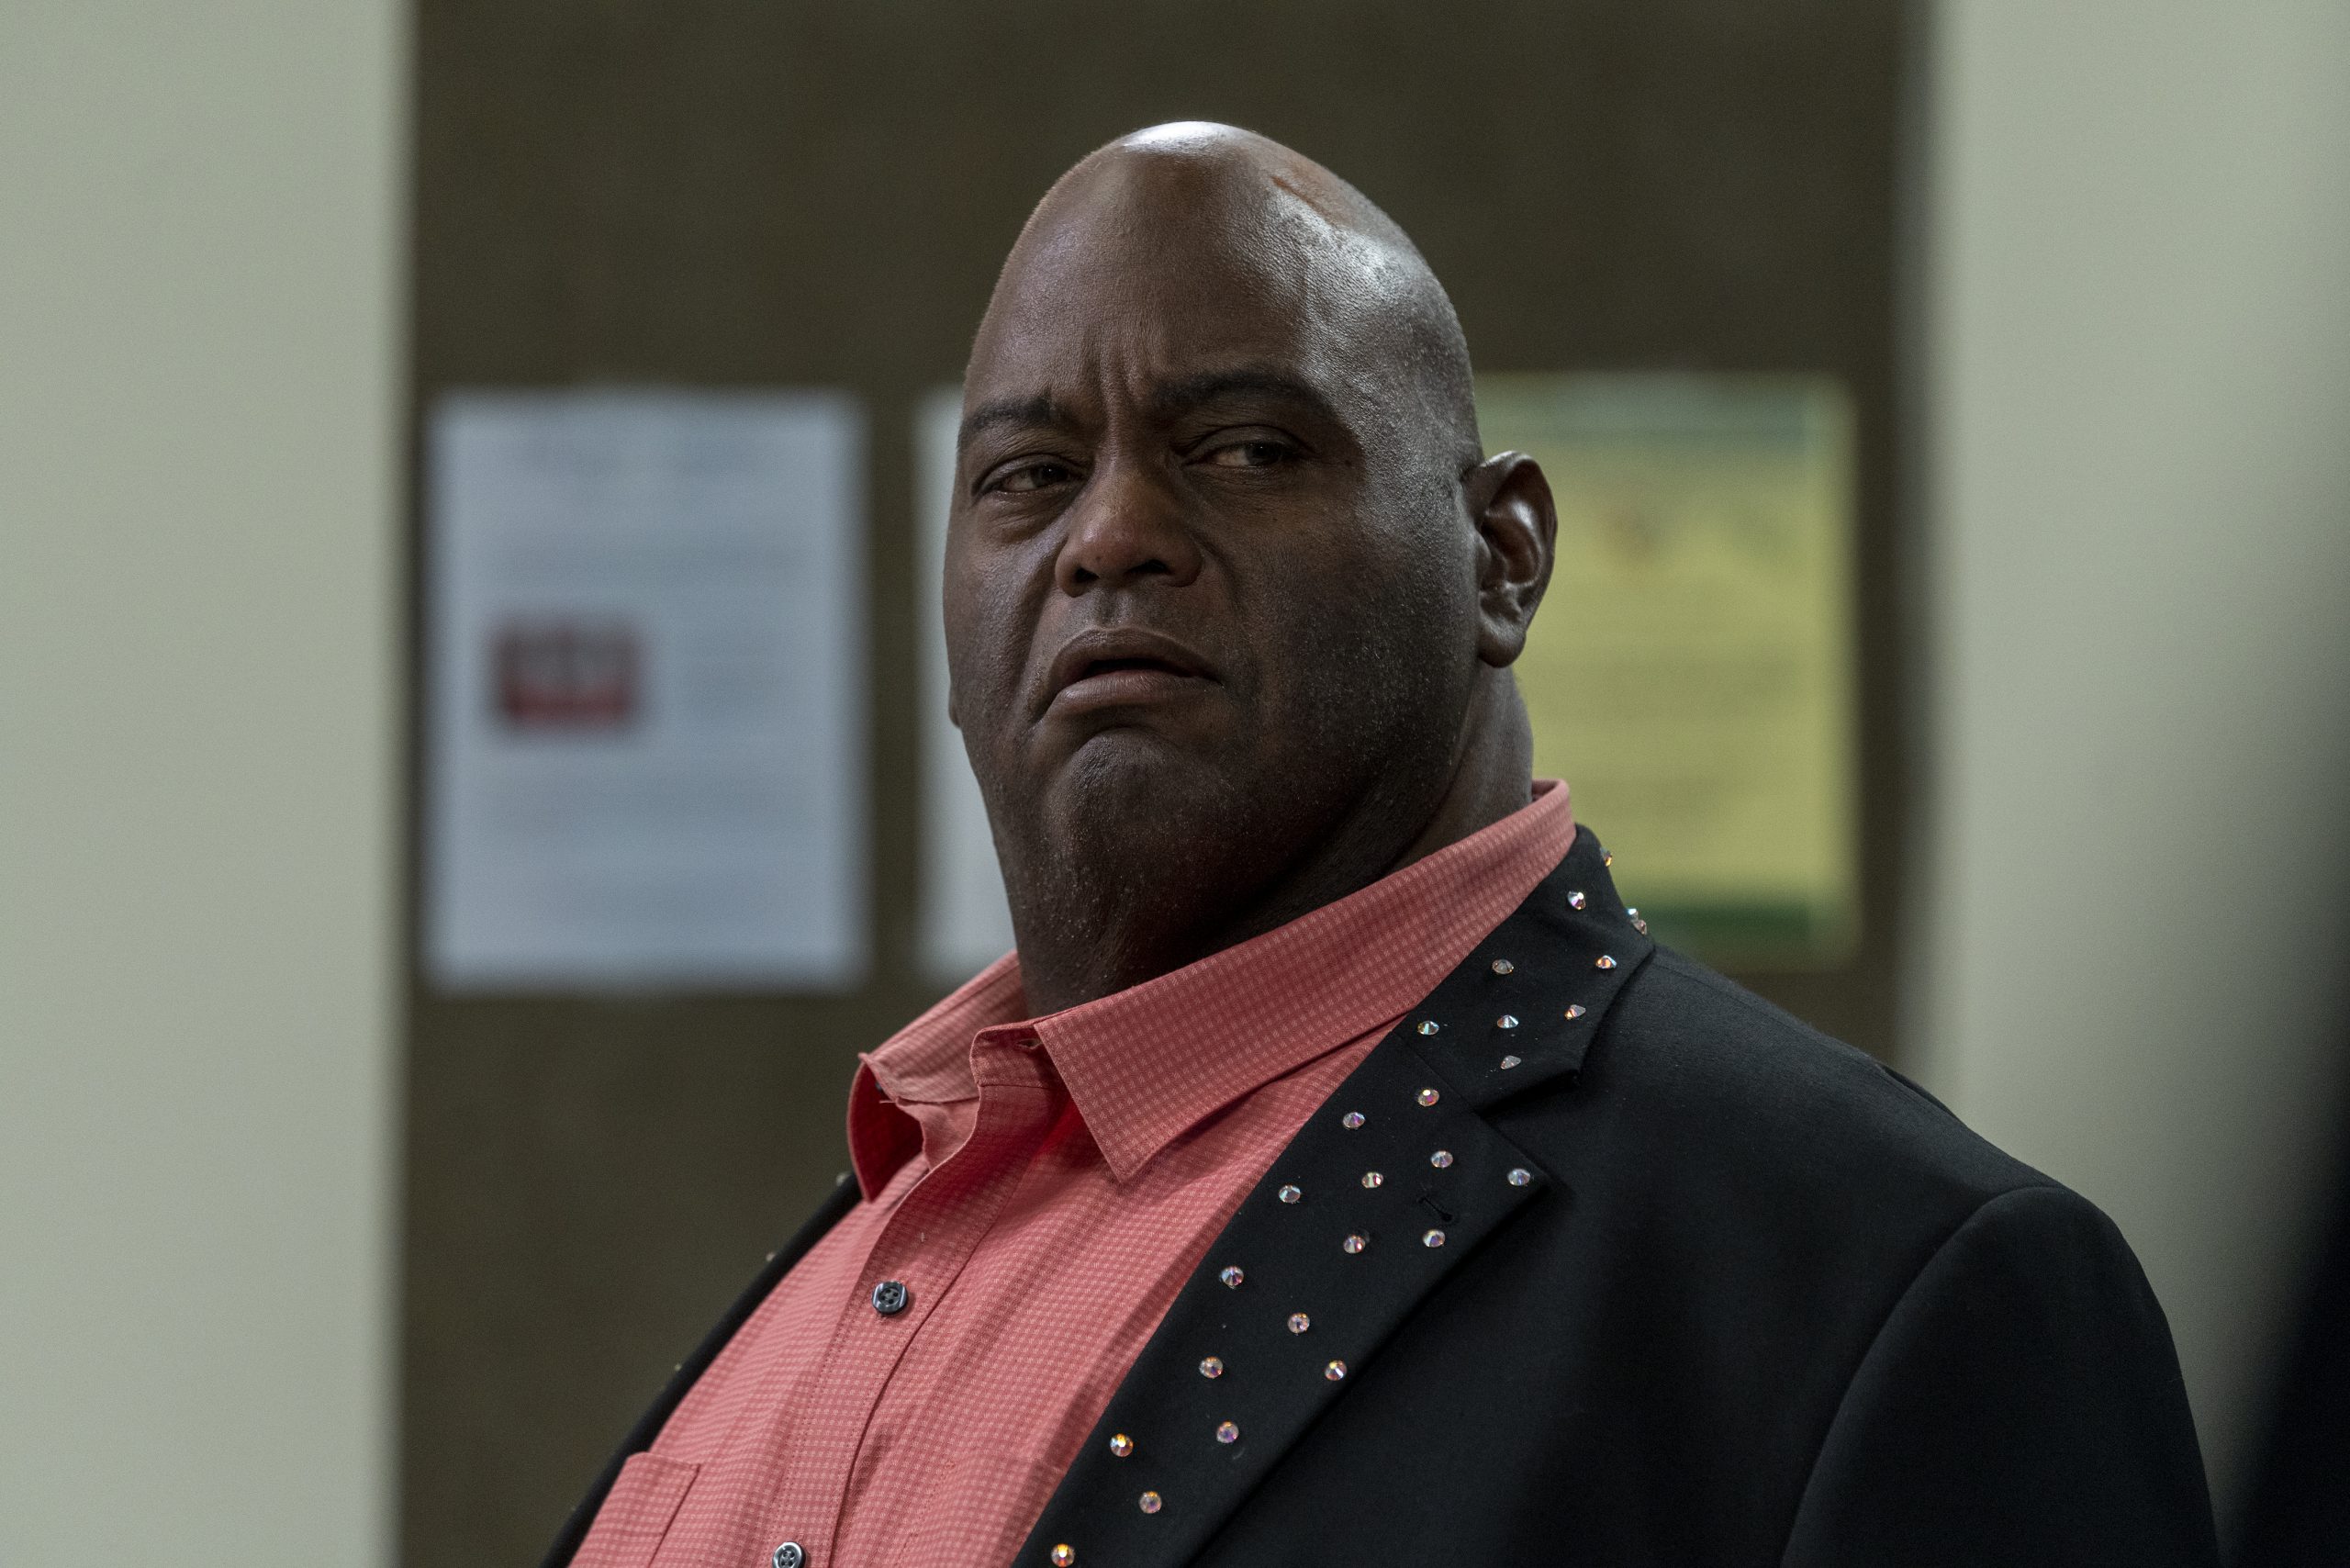 huell breaking bad meanwhile